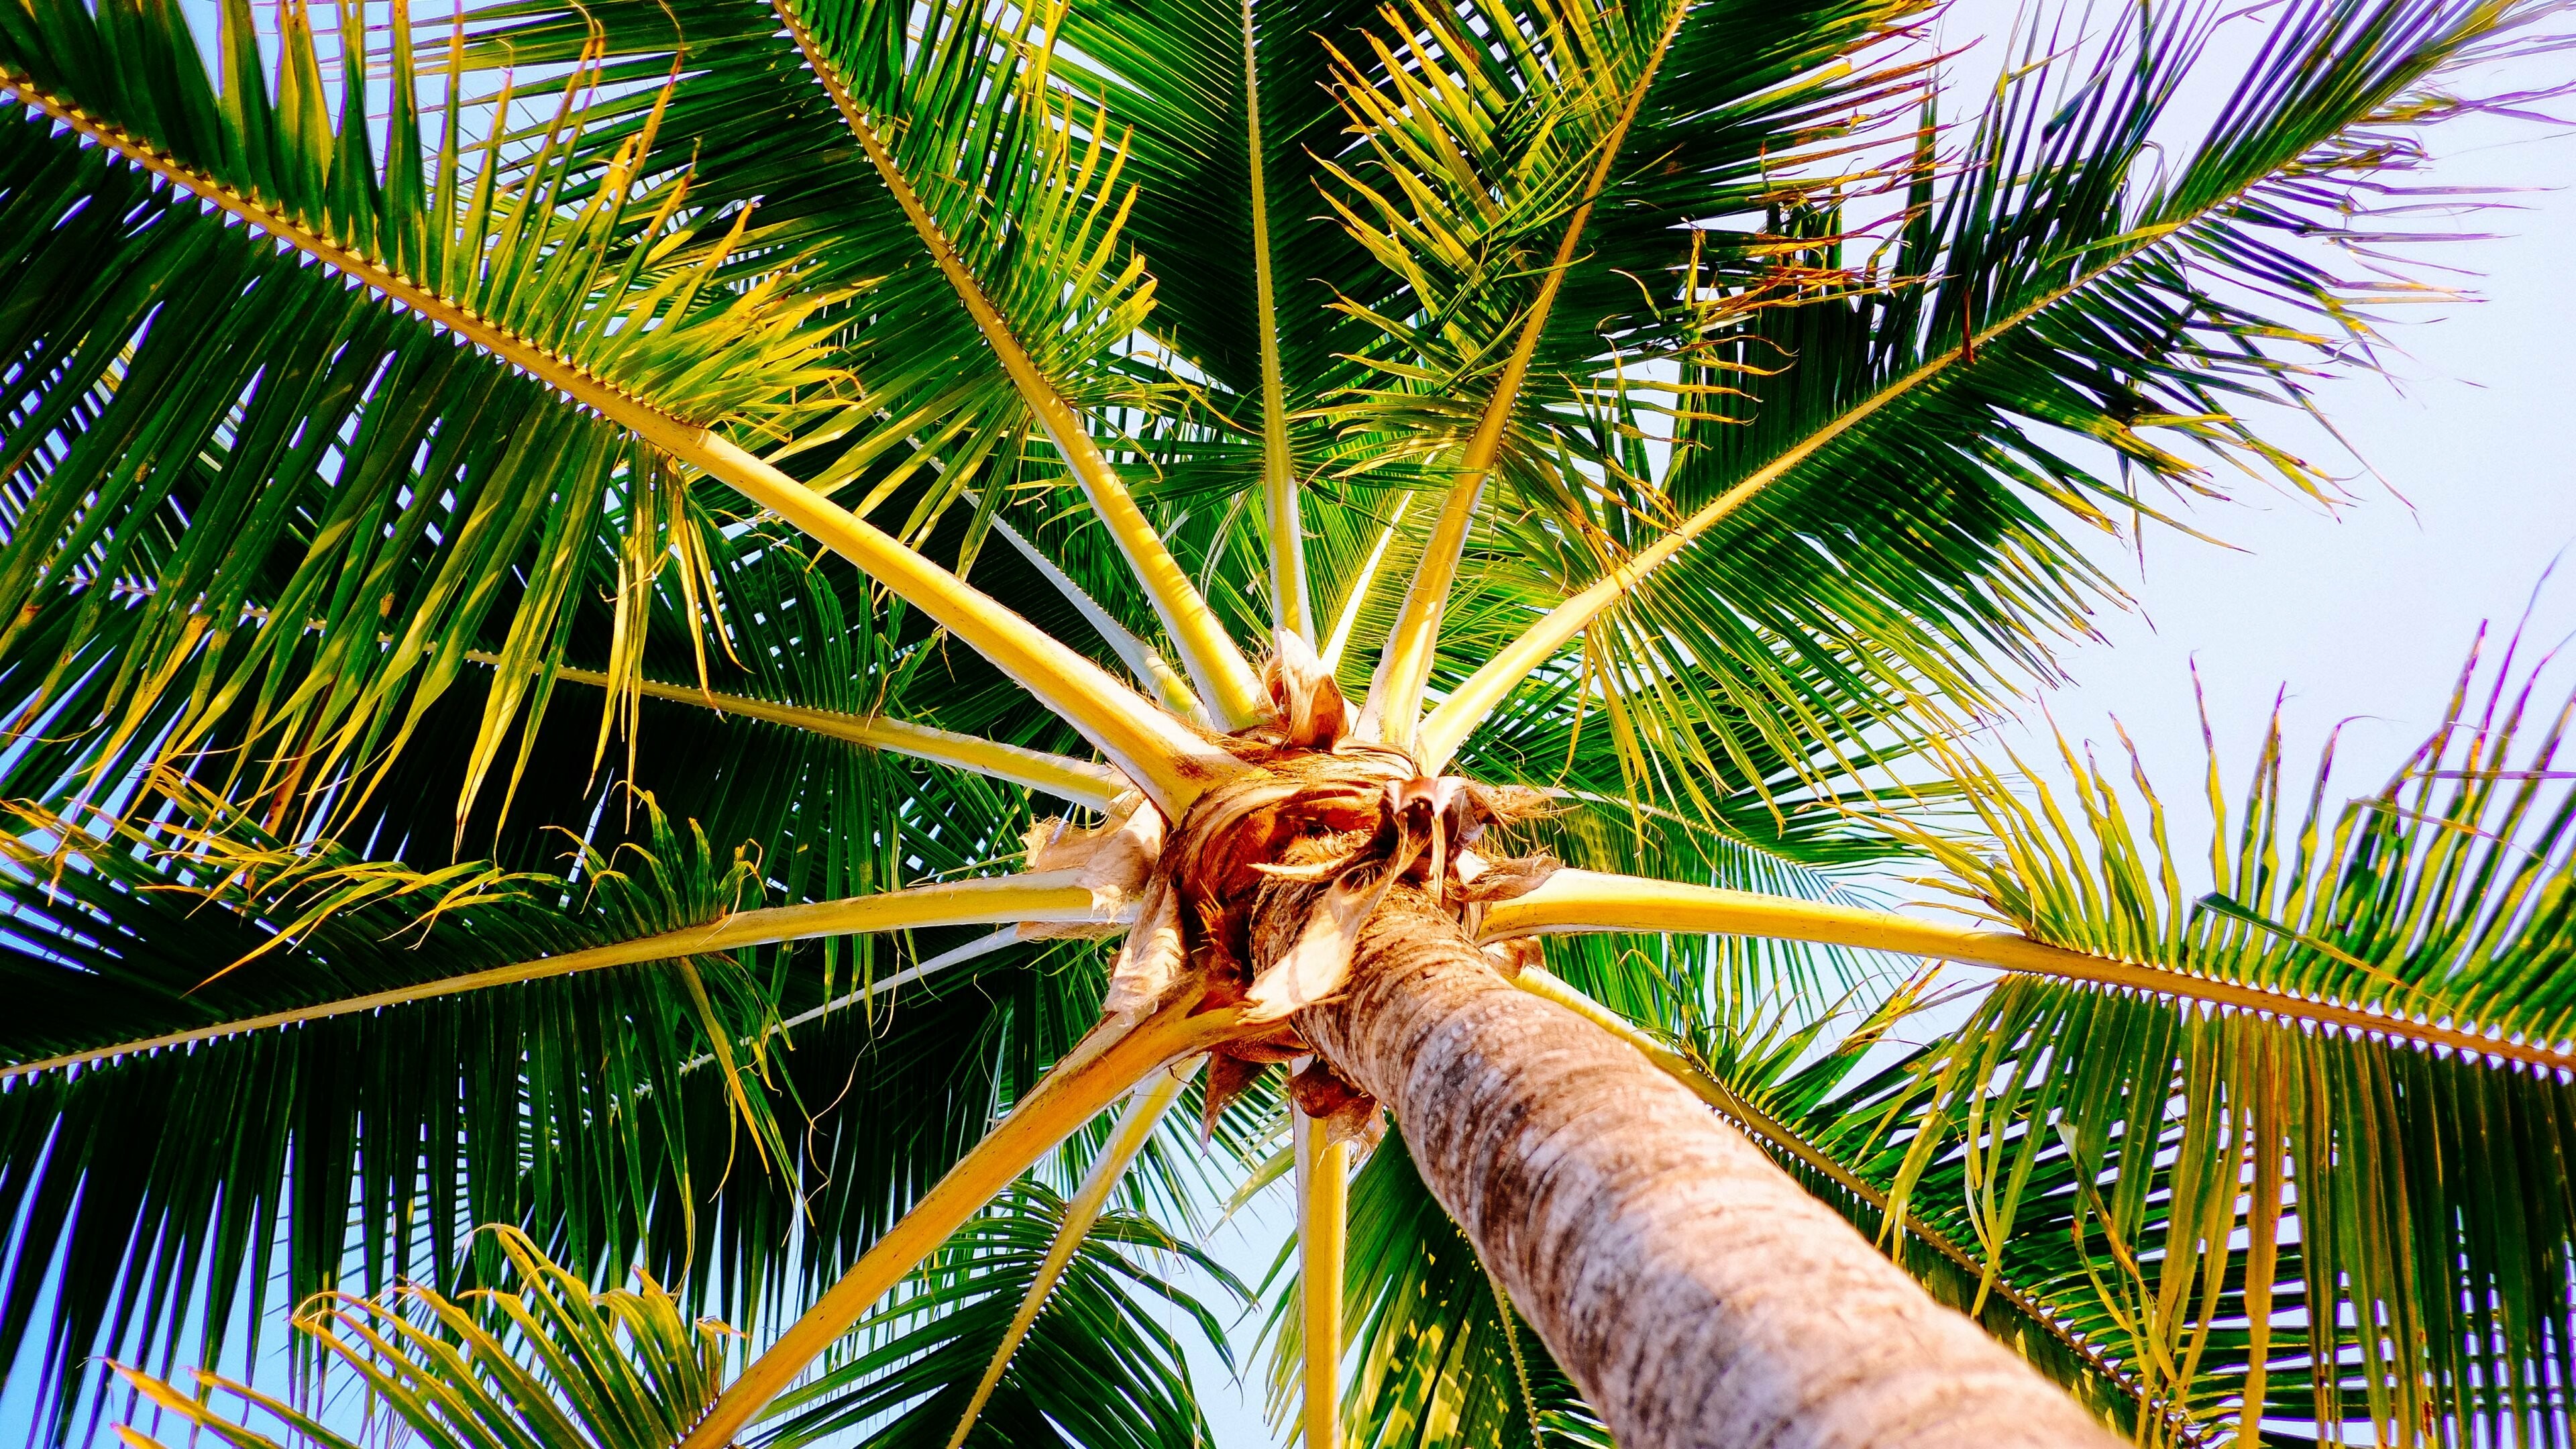 Palm Tree: A frond, A large, divided leaf, Tropical terrestrial plant. 3840x2160 4K Background.